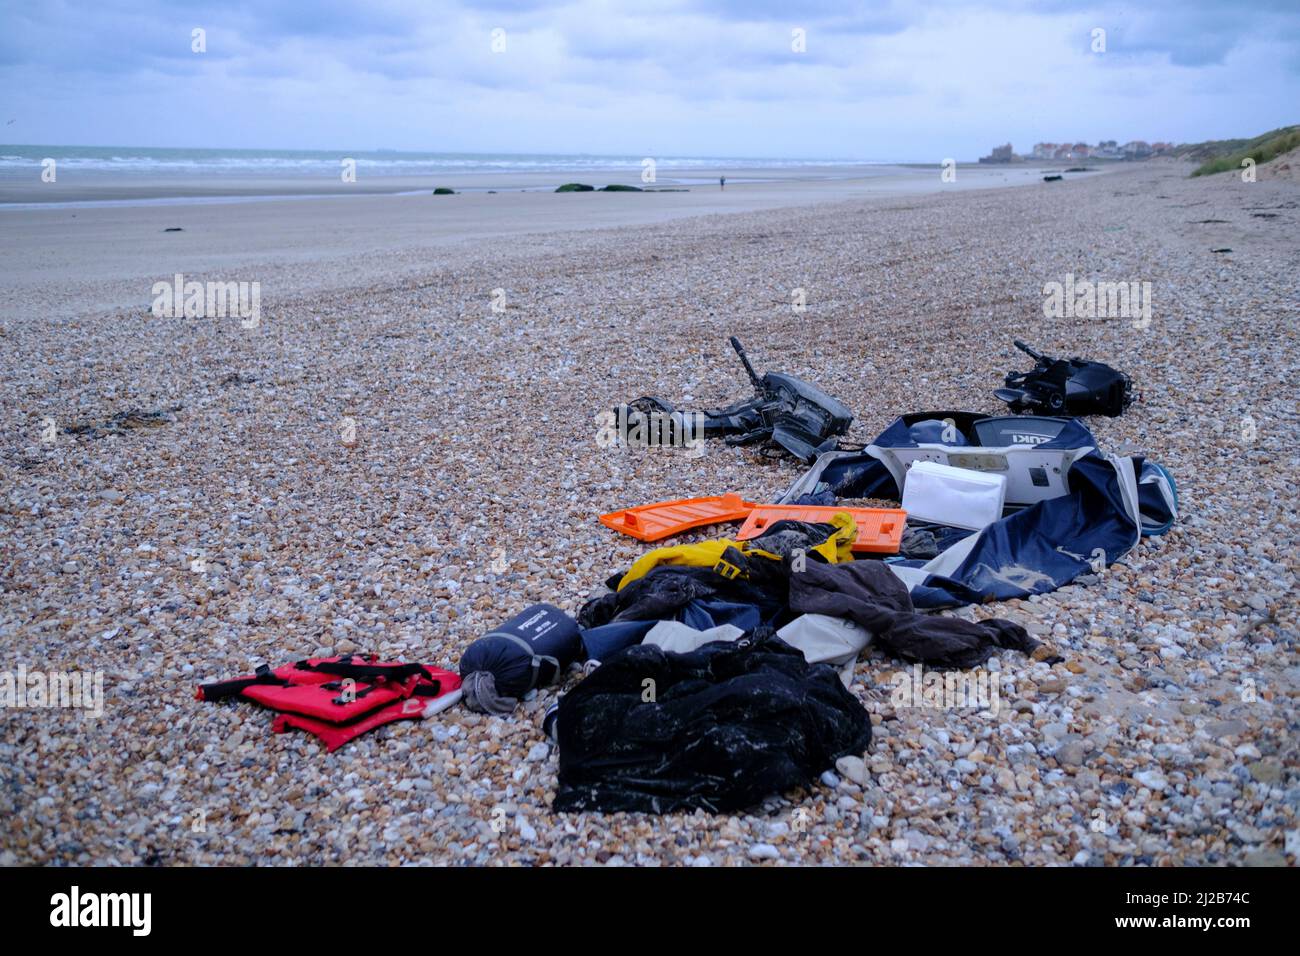 Refugees and migrants in the Hauts-de-France region (northern France), on November 26, 2021: pieces of boat, engine and refugees’ personal belongings Stock Photo